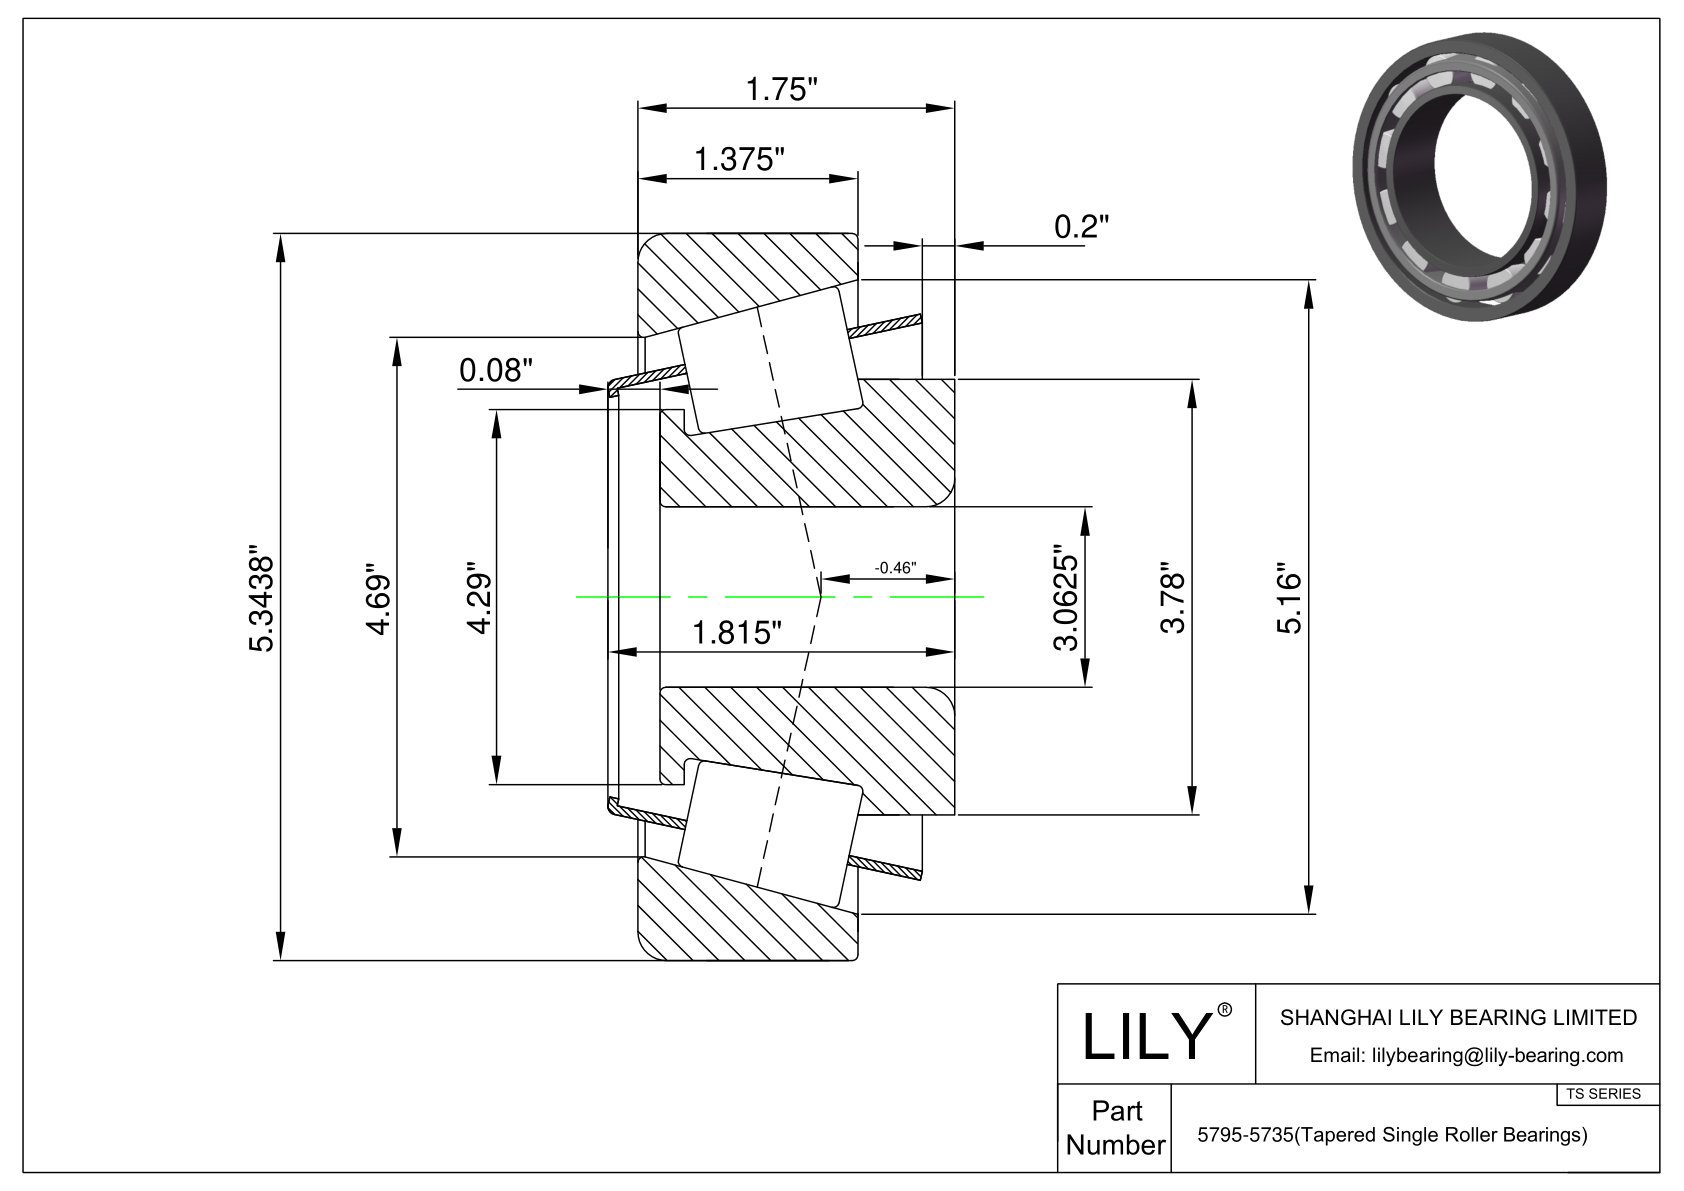 5795-5735 TS (Tapered Single Roller Bearings) (Imperial) cad drawing